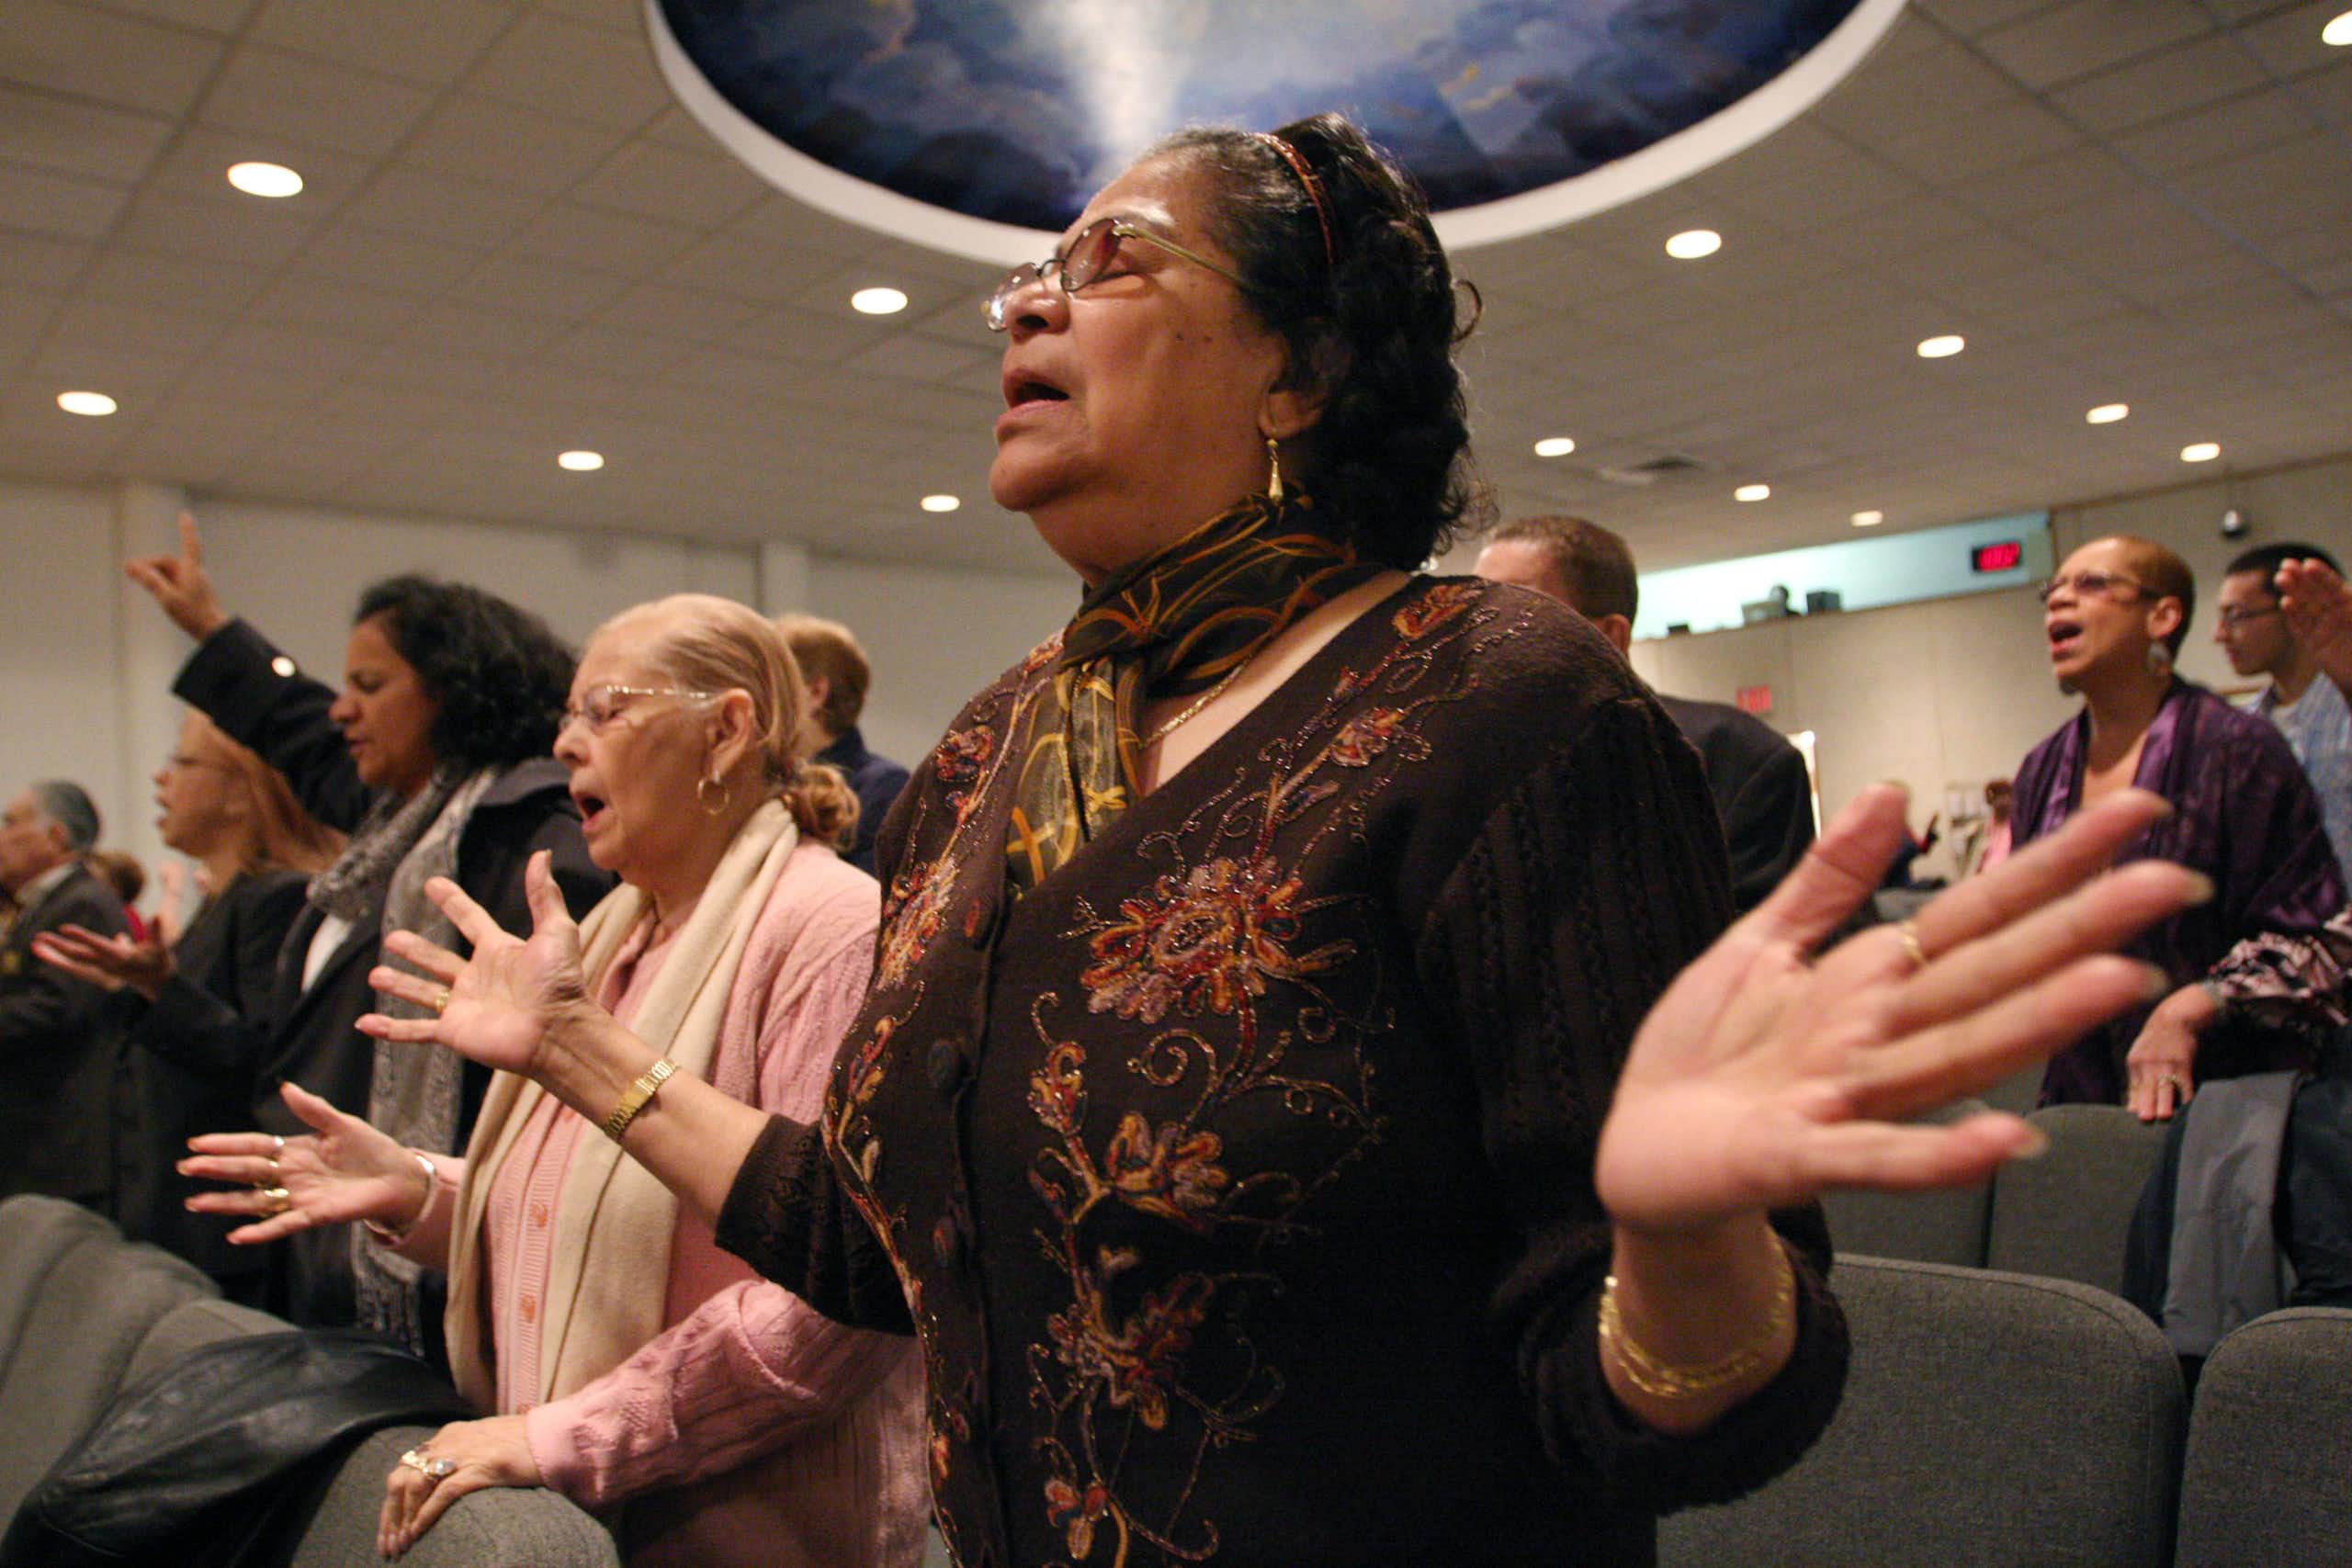 Evangelical Christians are racially diverse – and hold diverse views on immigration